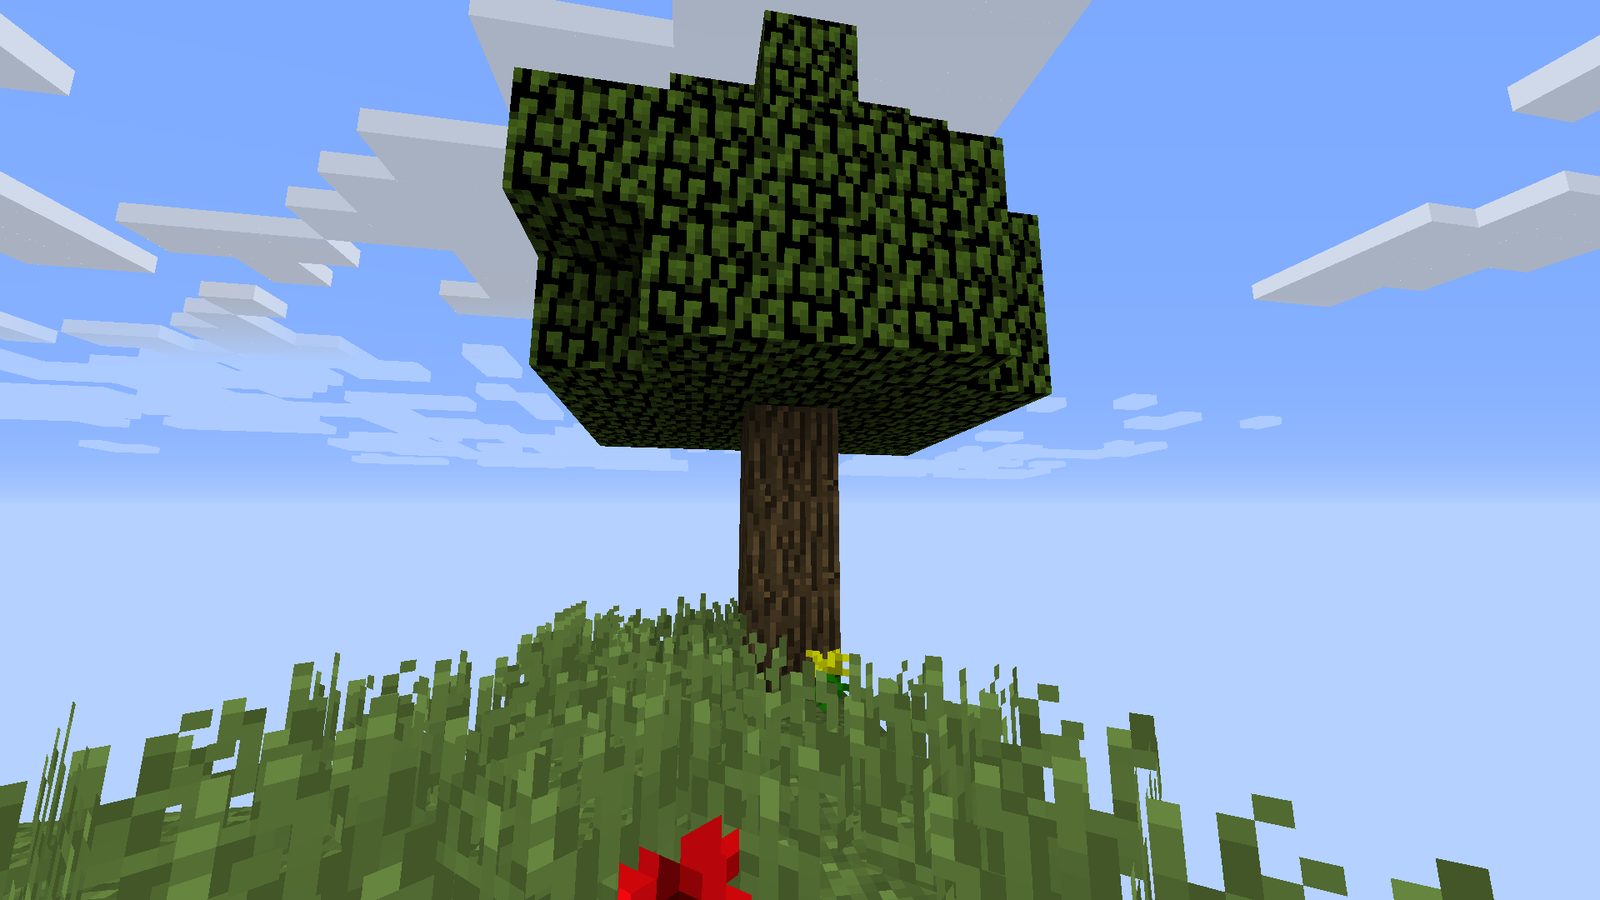 minecraft skyblock download for mac